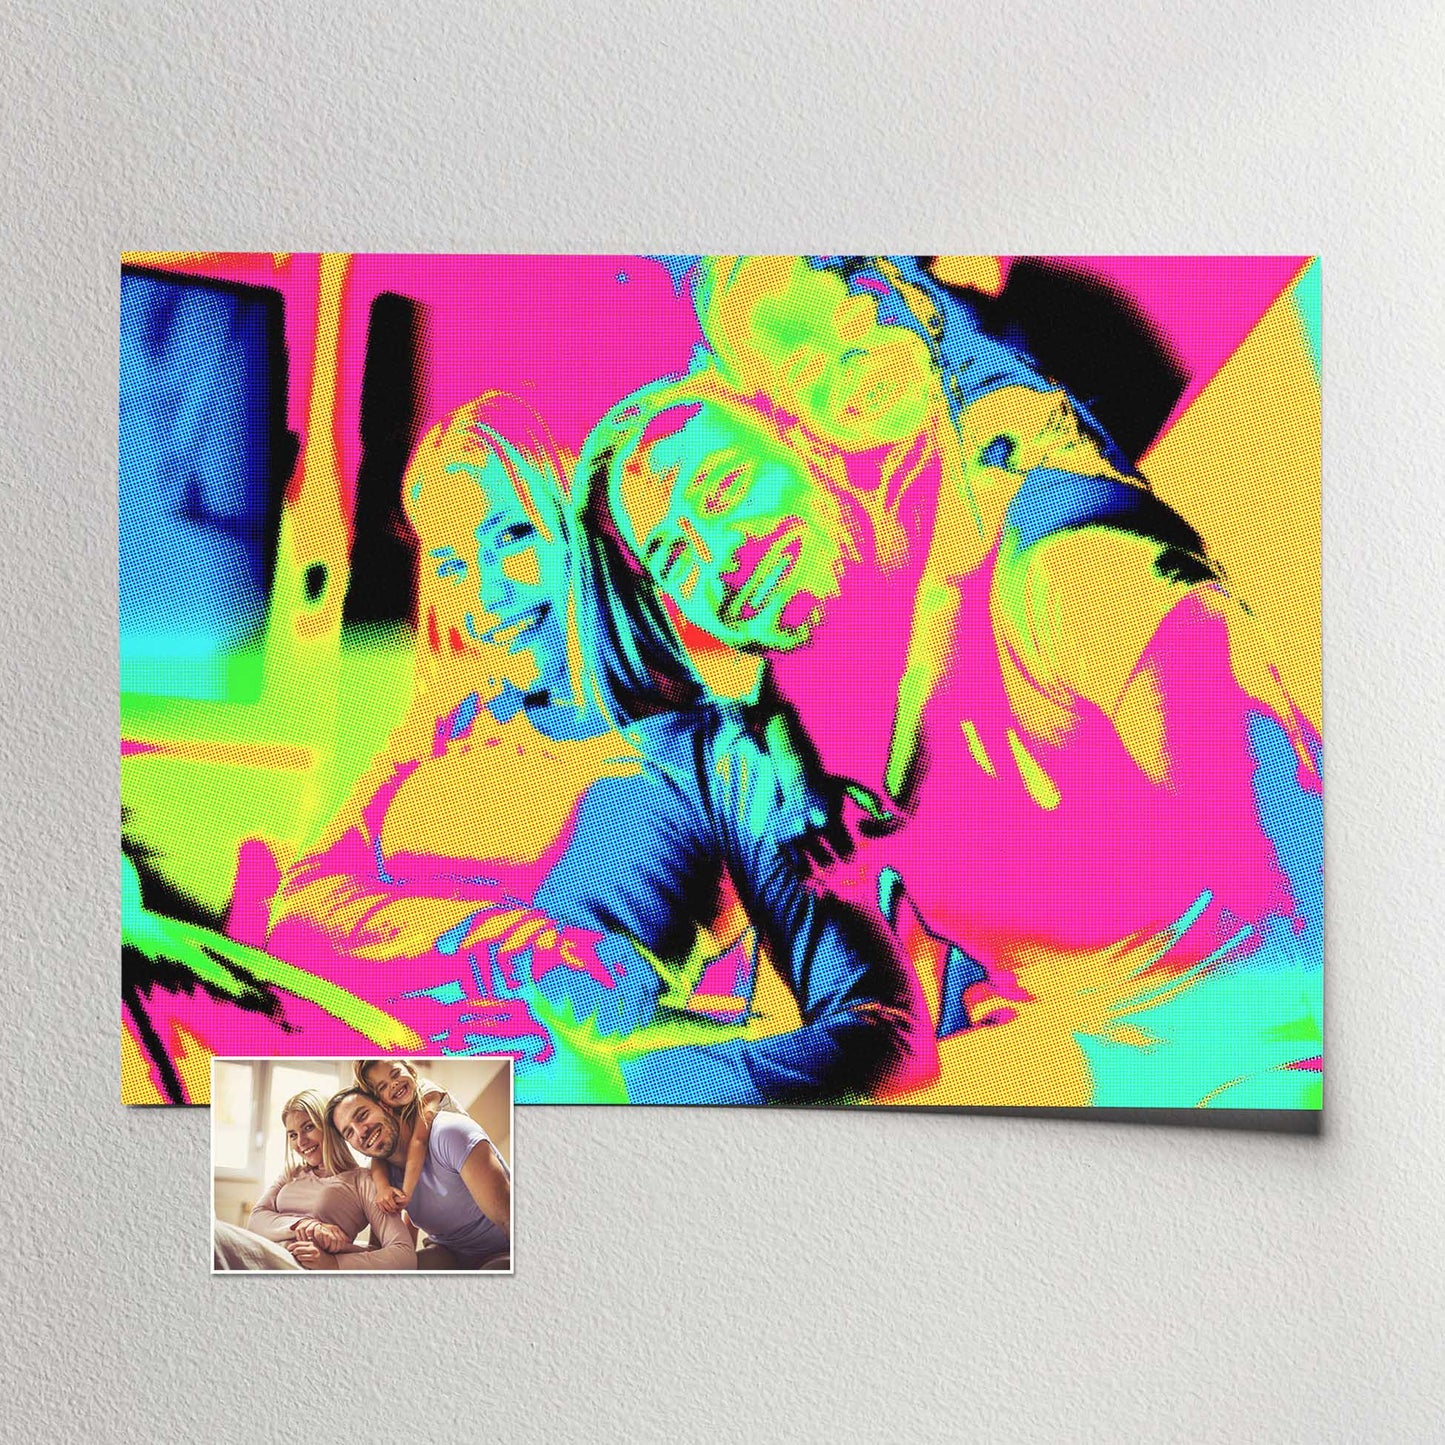 Infuse your space with the essence of boldness and coolness with a Personalised Pop Art Print. Created using a pop art filter and retro halftone effect, this artwork bursts with vibrant colors. The vivid pink, orange, green, blue, and purple